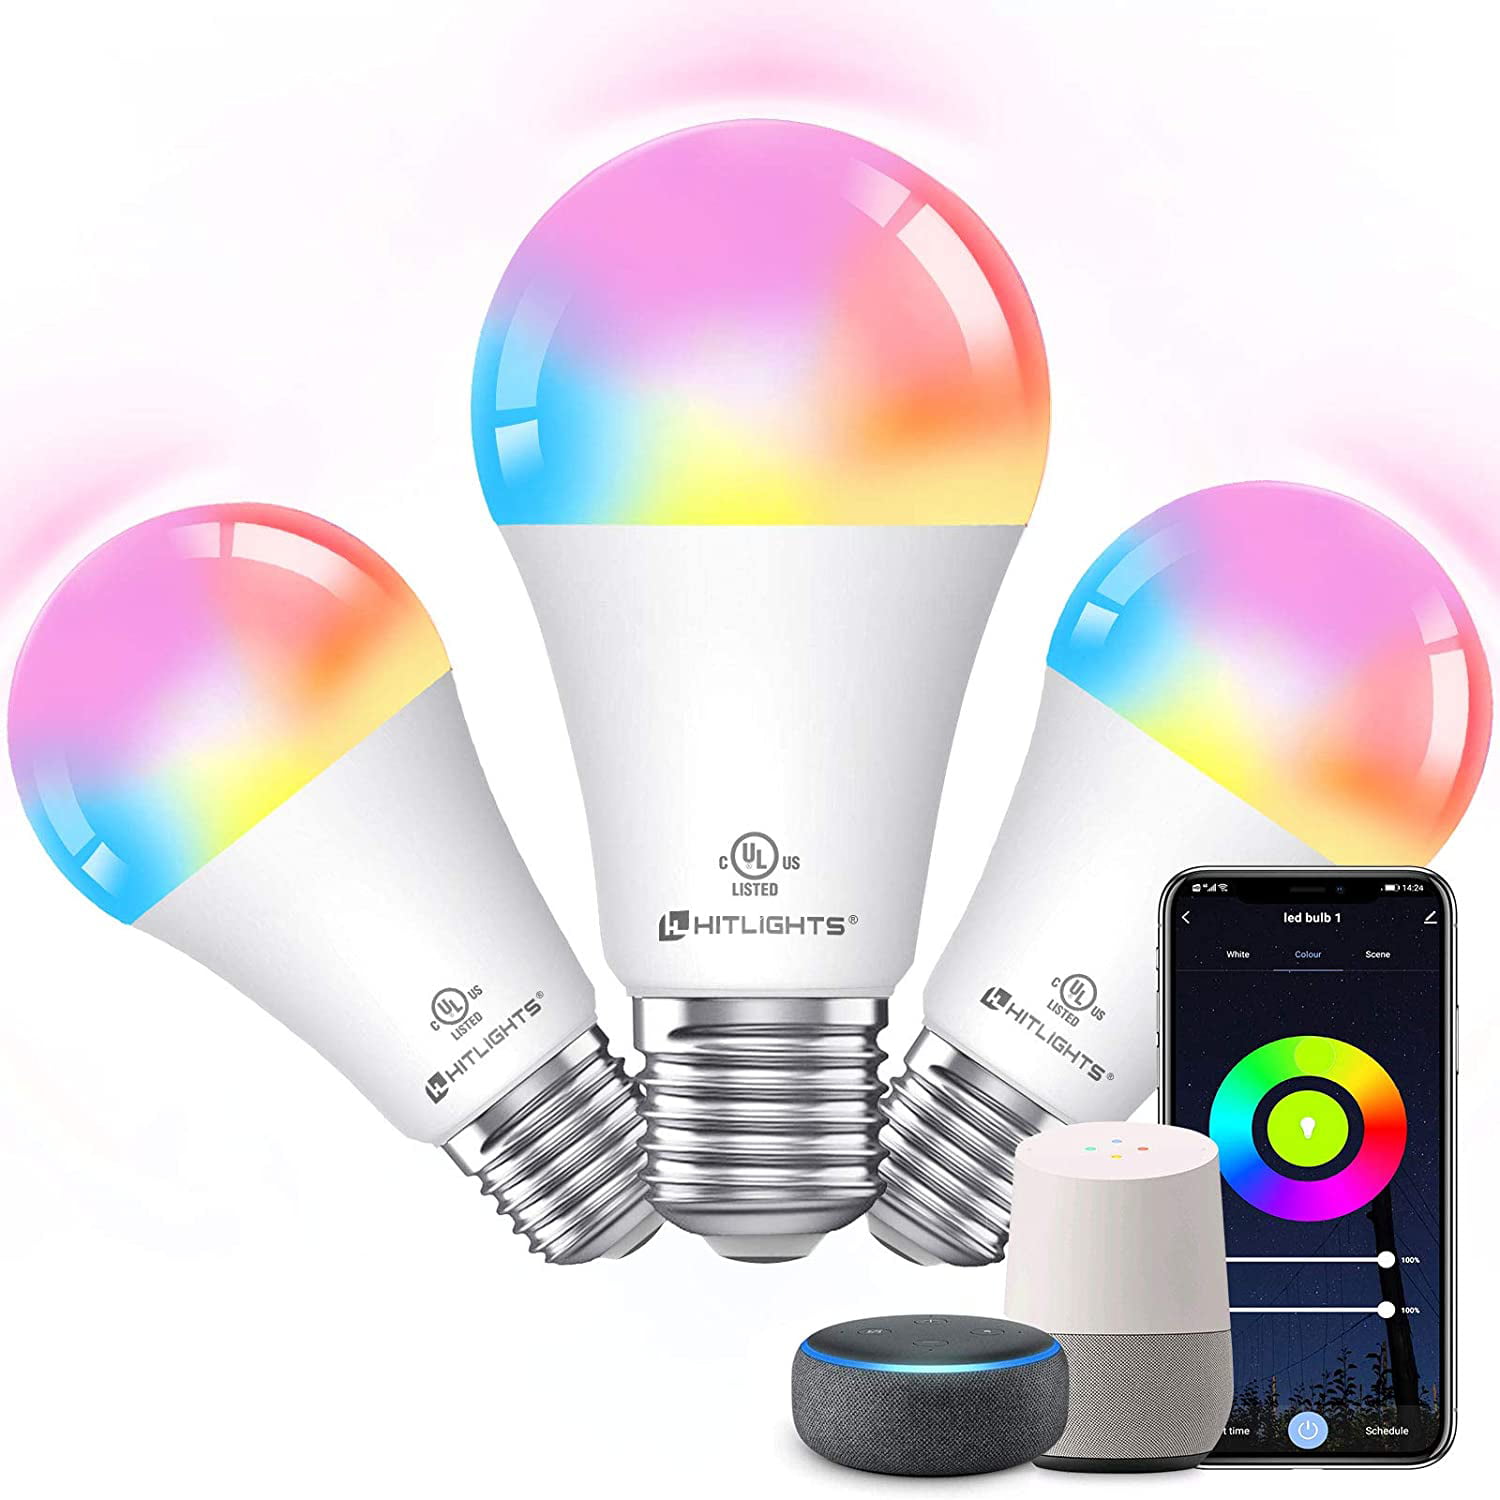 YHW Smart Light Bulb,UL Listed,WiFi+Bluetooth,Work with Alexa,Google No Need Hub ,7W E26 A19 Color Change Light Bulb,Dimmable RGB+Warm+White for Bedroom,Party-4 Pack 